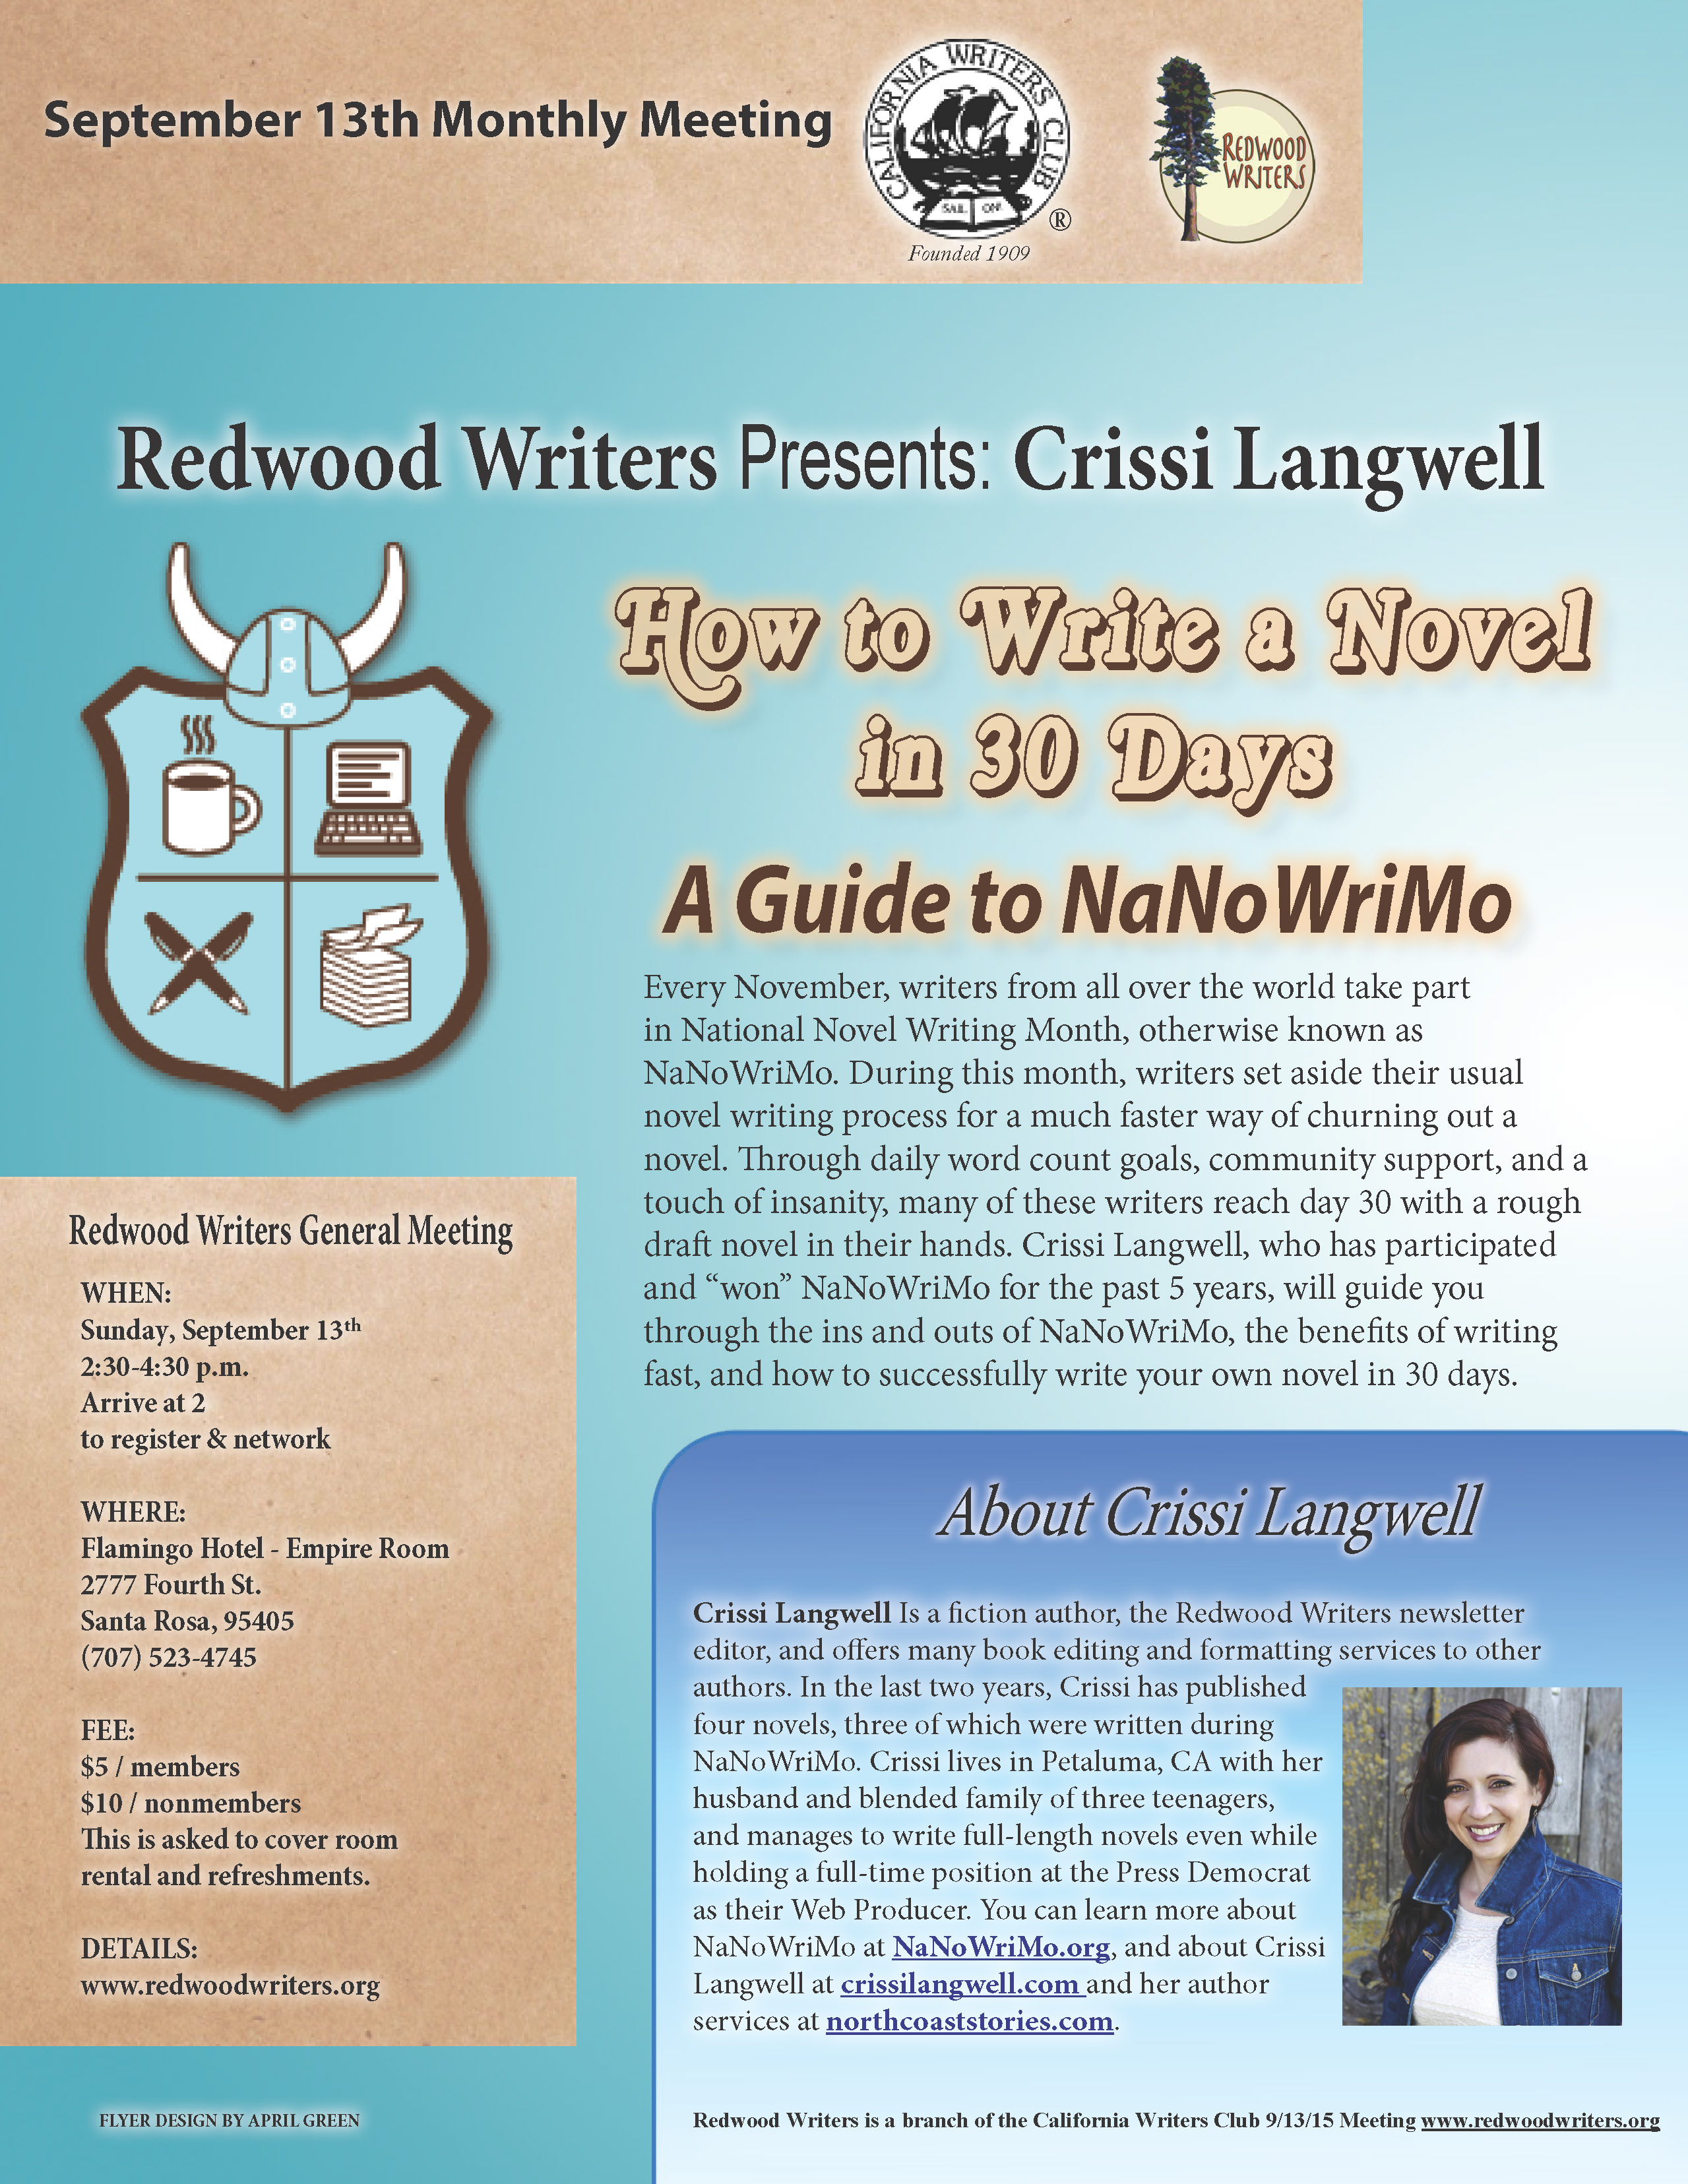 Event: How to write a novel in 30 days – Crissi Langwell